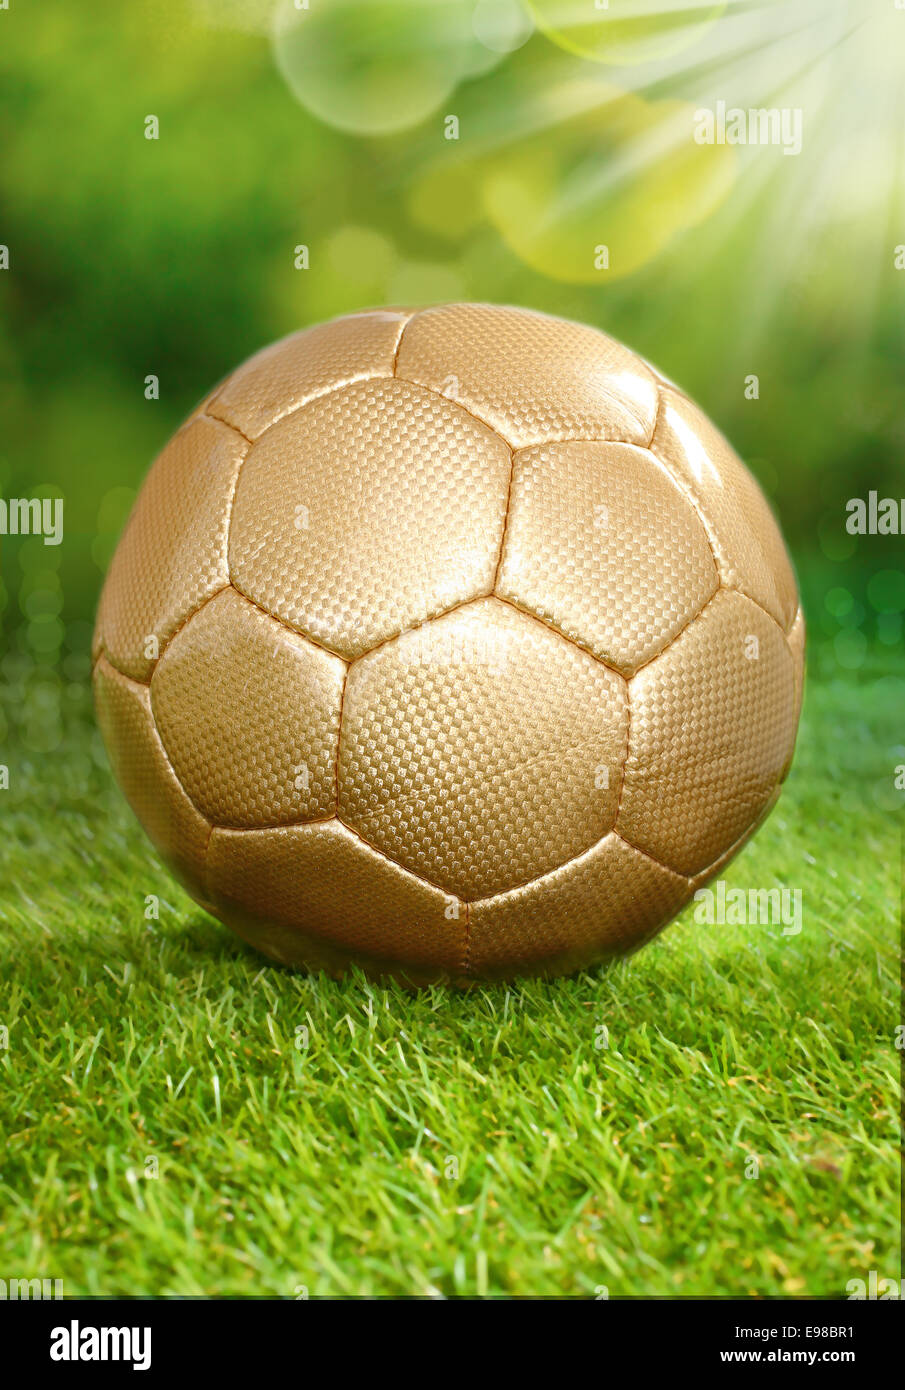 Conceptual image of a healthy outdoor lifestyle playing soccer in summer with a gold coloured soccer ball standing on lush green grass under the rays of the sun Stock Photo